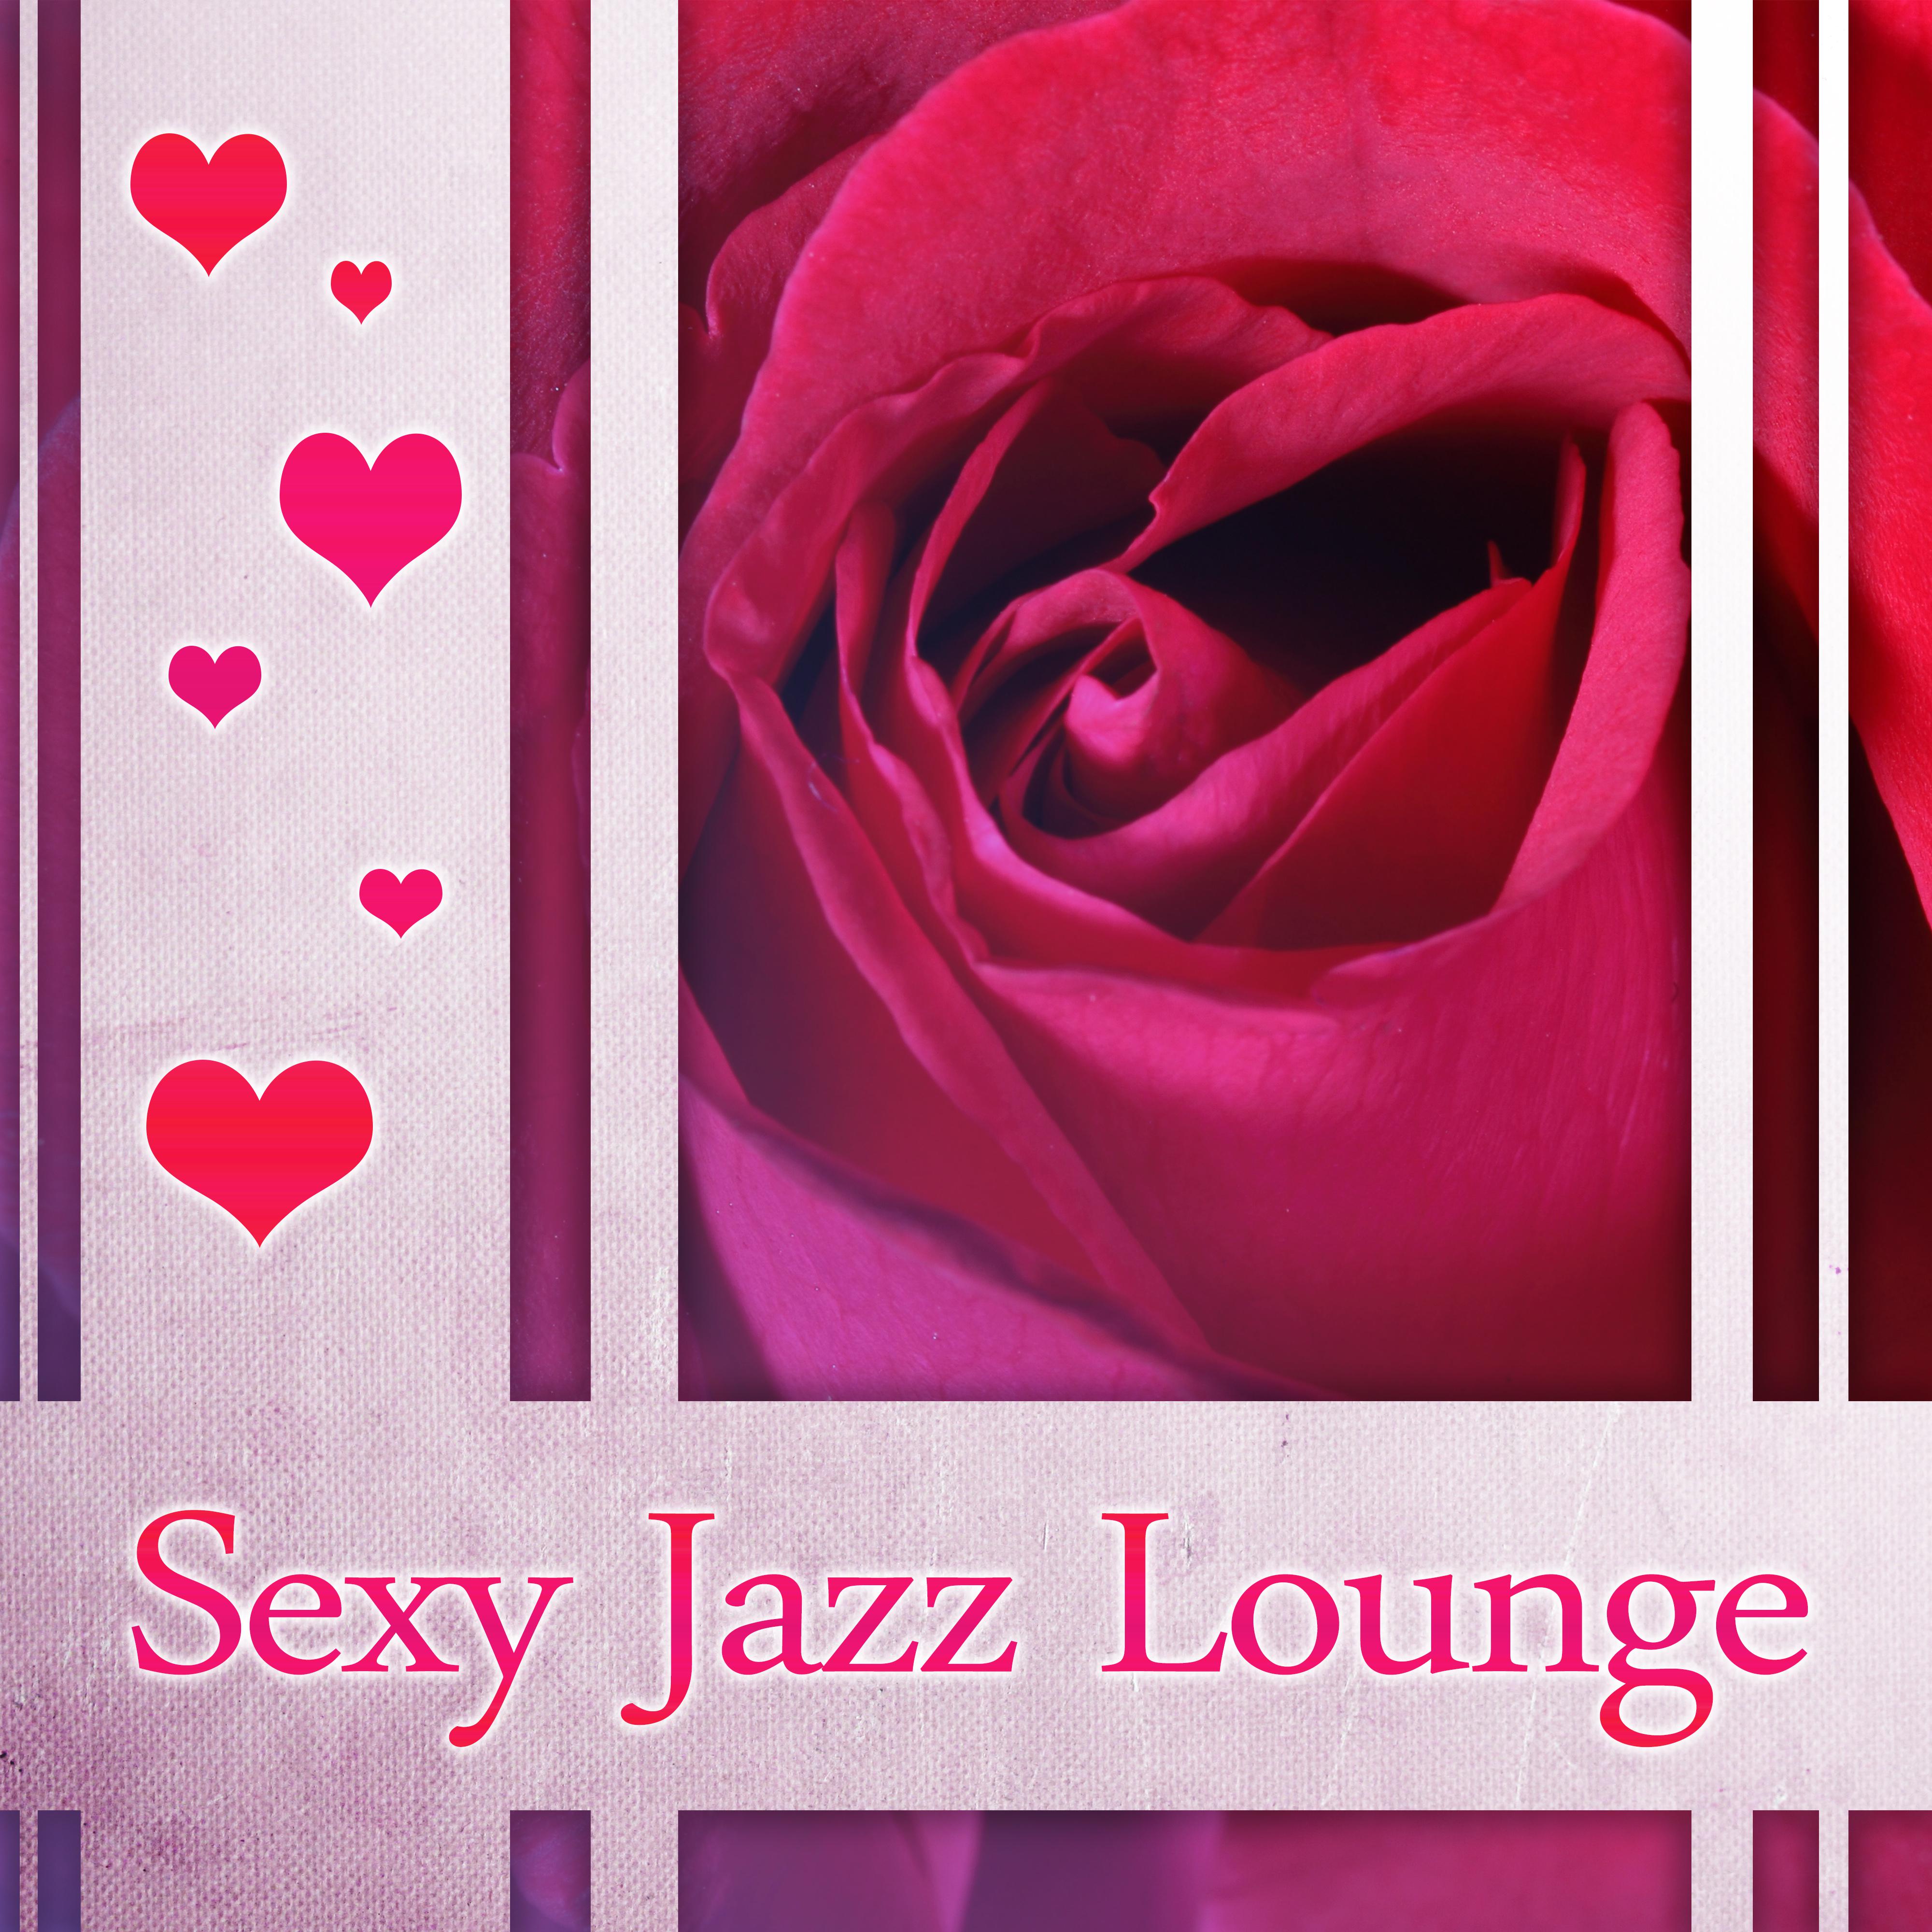 Sexy Jazz Lounge – Erotic Vibes of Instrumental Jazz, Saxophone Sounds and Piano in the Background